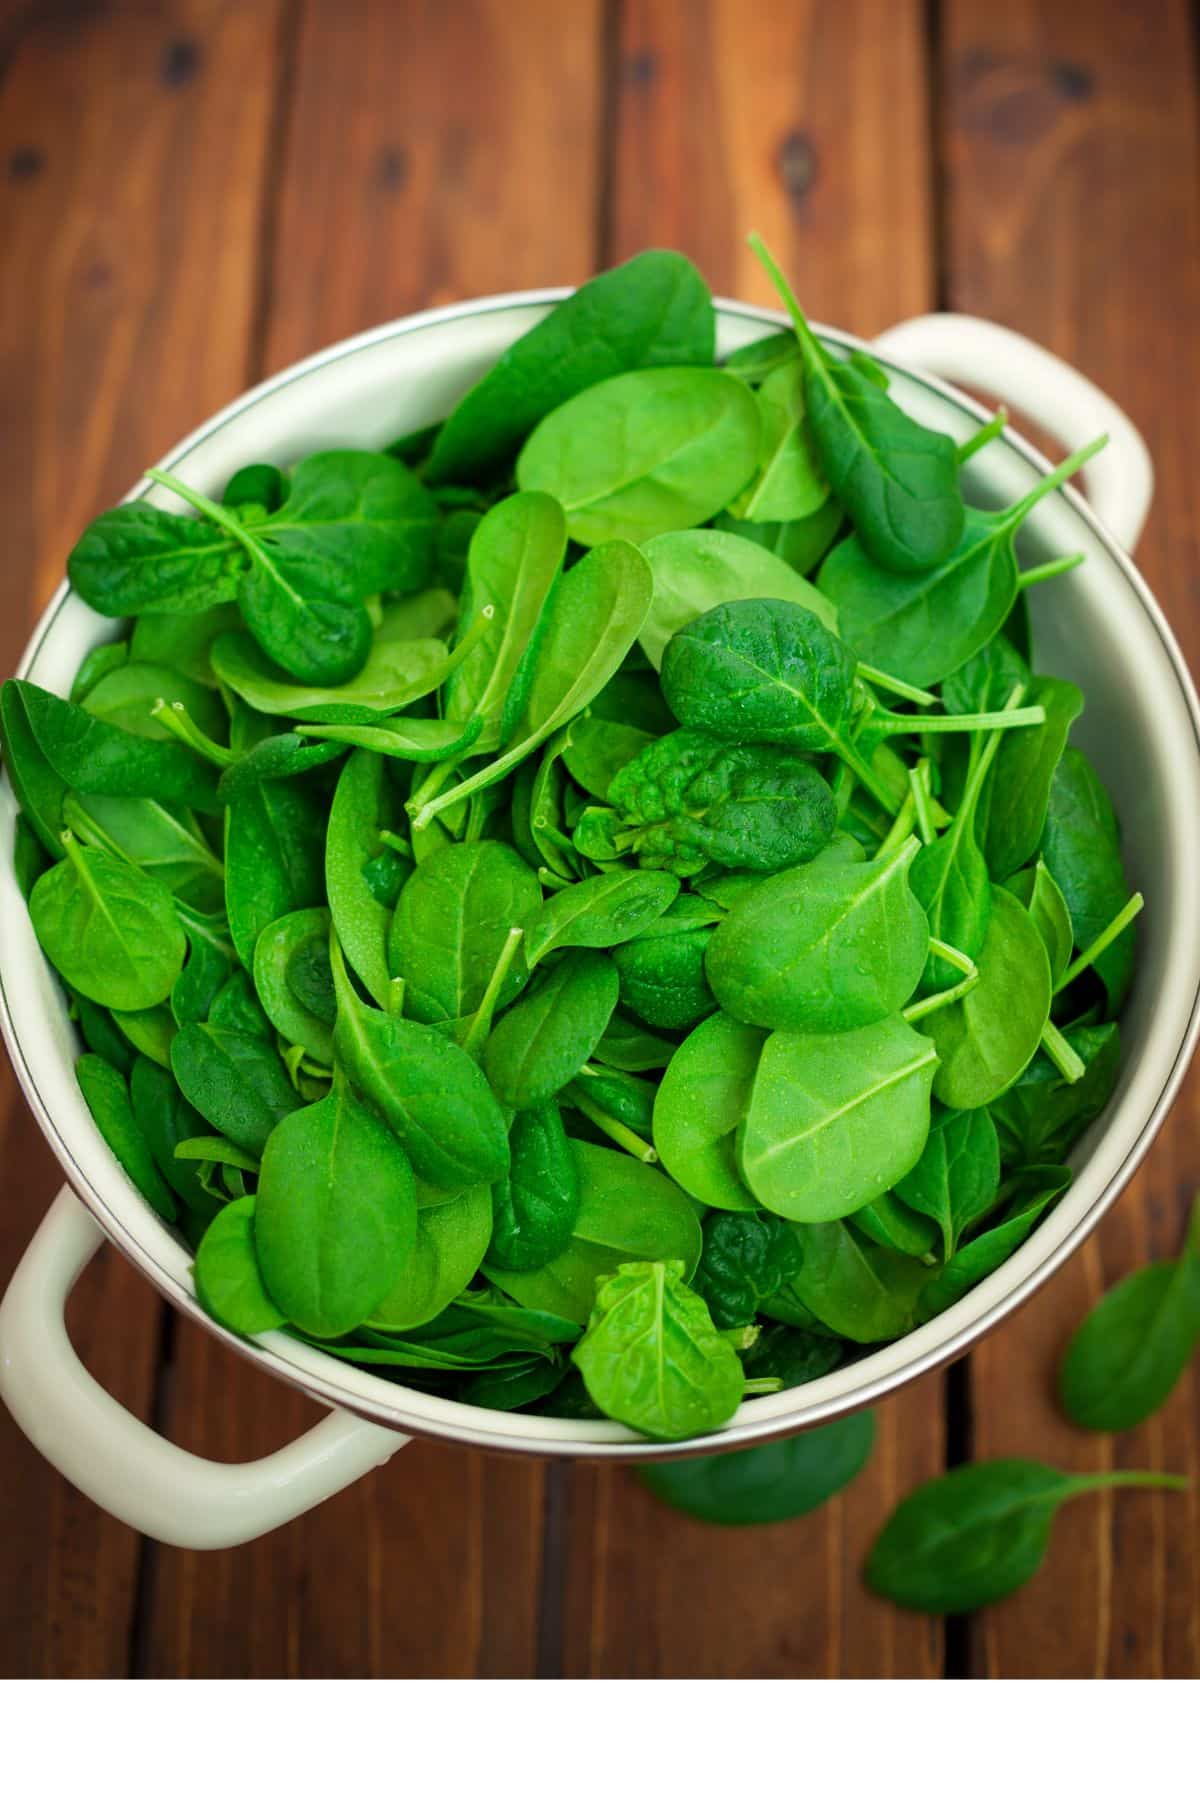 Bowl of fresh spinach on wooden surface.